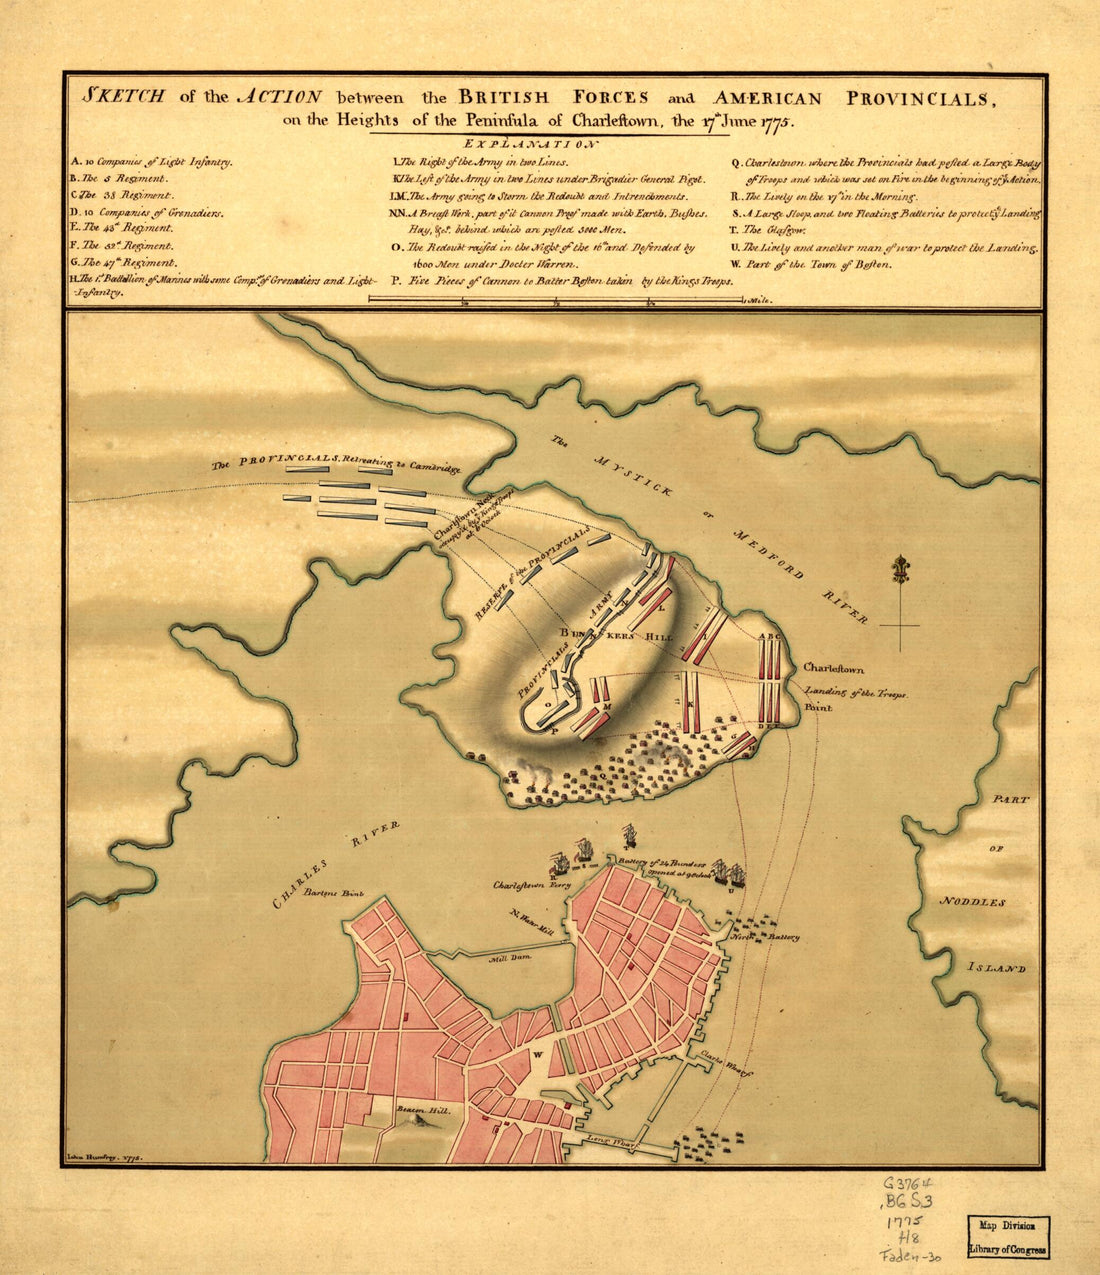 This old map of Sketch of the Action Between the British Forces and American Provincials, On the Heights of the Peninsula of Charlestown, the 17th June from 1775 was created by John Humfrey in 1775